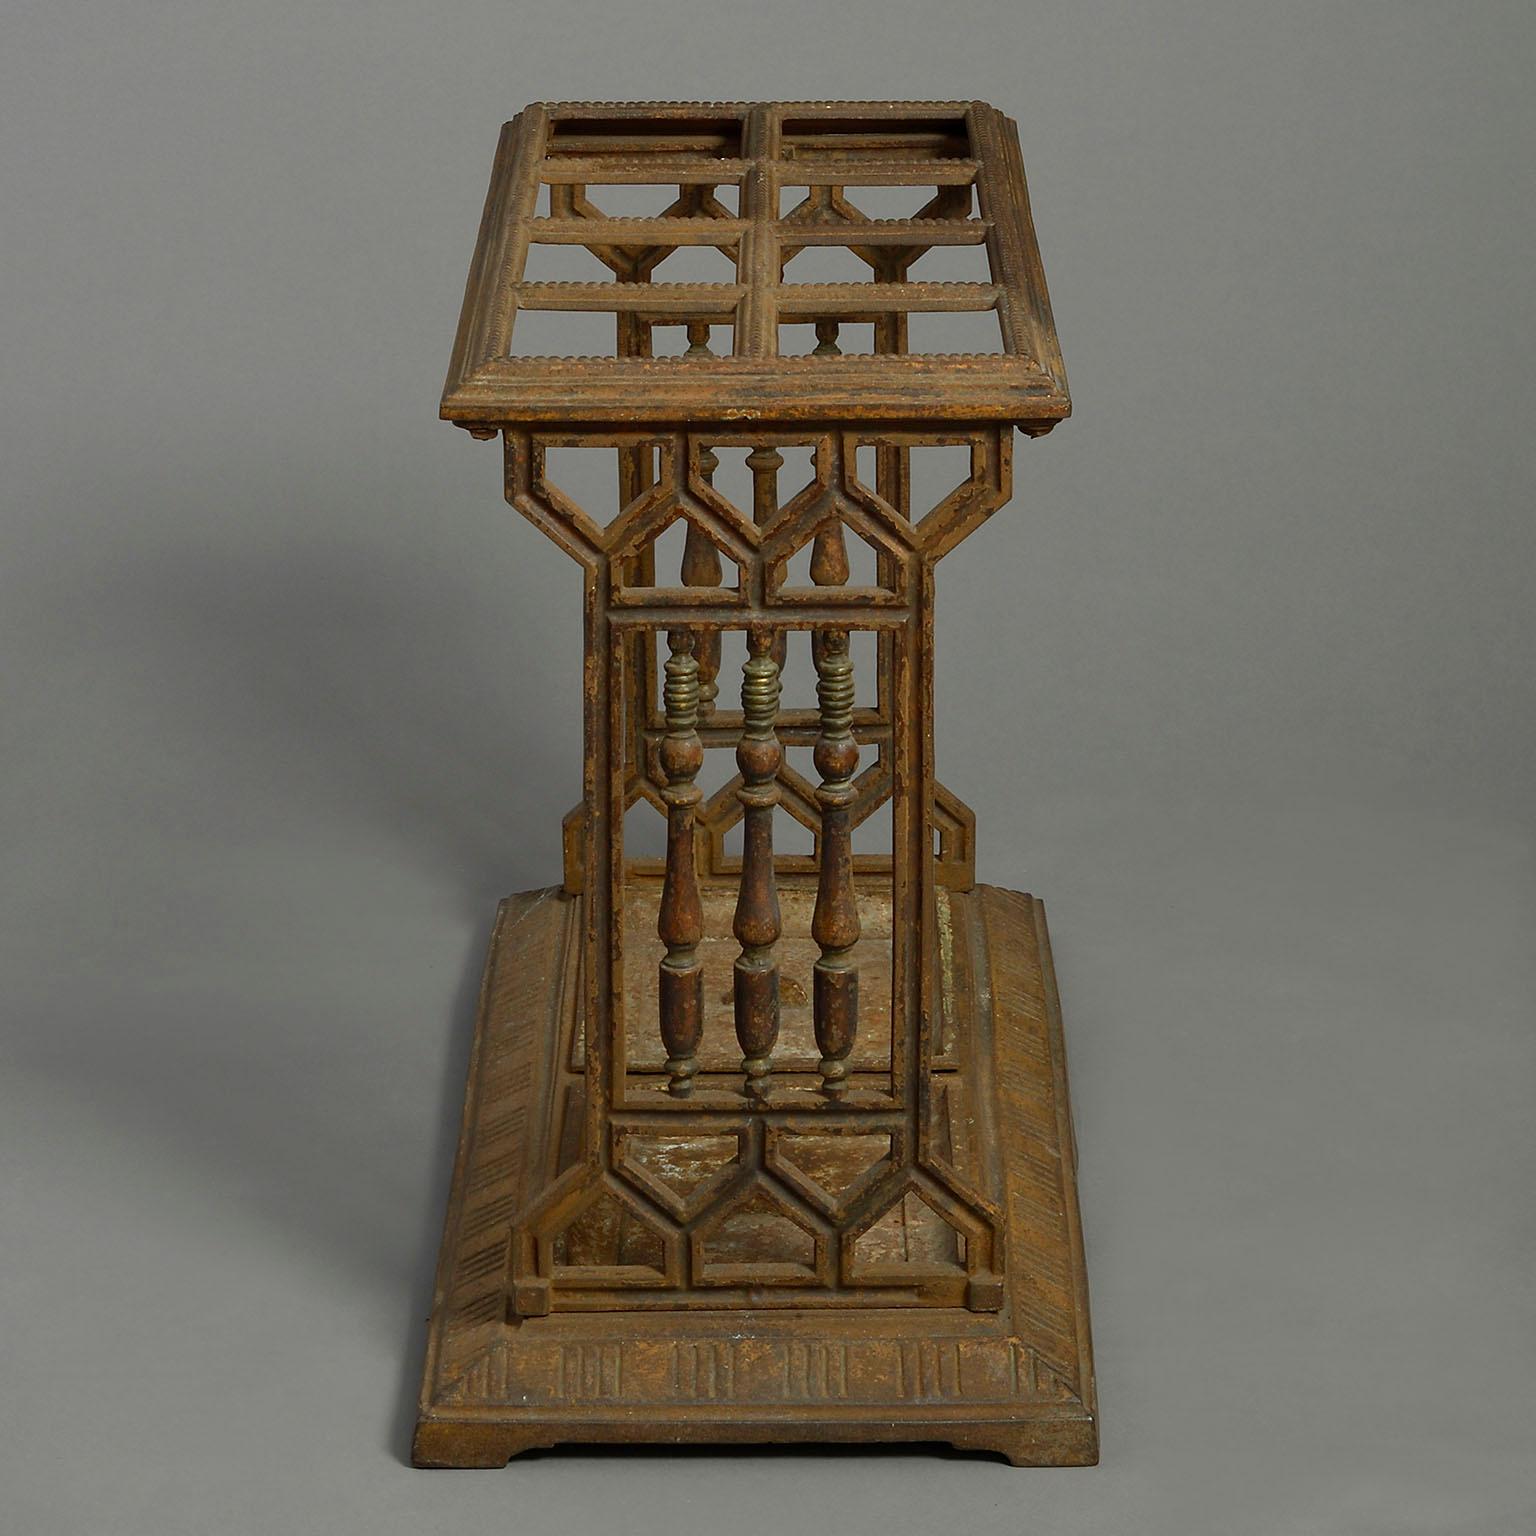 A late nineteenth century Aesthetic Movement cast iron stick and umbrella stand, the eight square divisions set upon balustraded ends, the base with two drip pans.

Circa 1880 England

Dimensions: 27 W x 13.5 D x 21.5 H inches
69 W x 34 D x 55